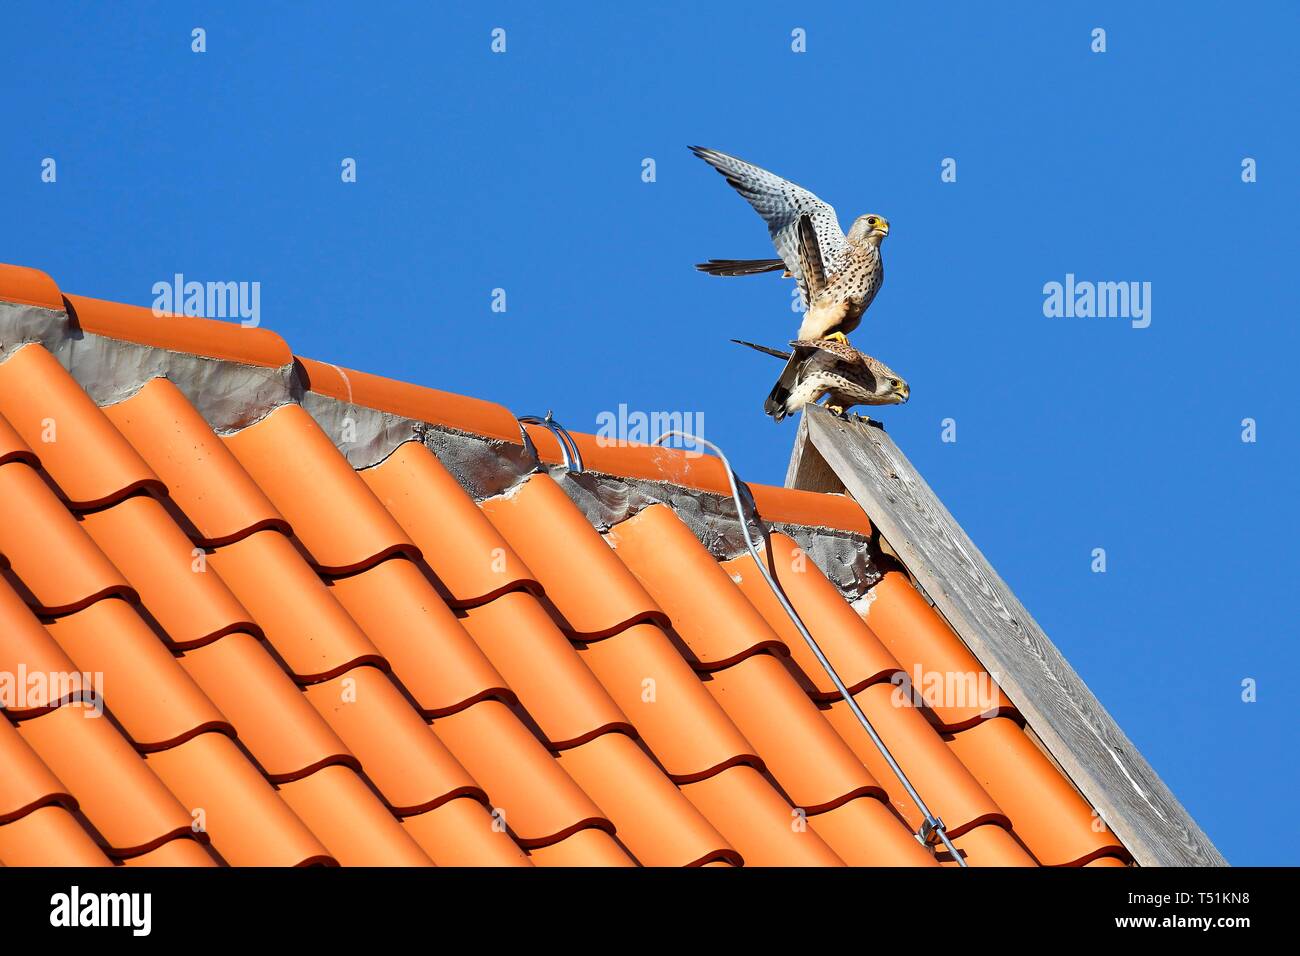 Common kestrels (Falco tinnunculus), pairing on tiled roof, Schleswig-Holstein, Germany Stock Photo